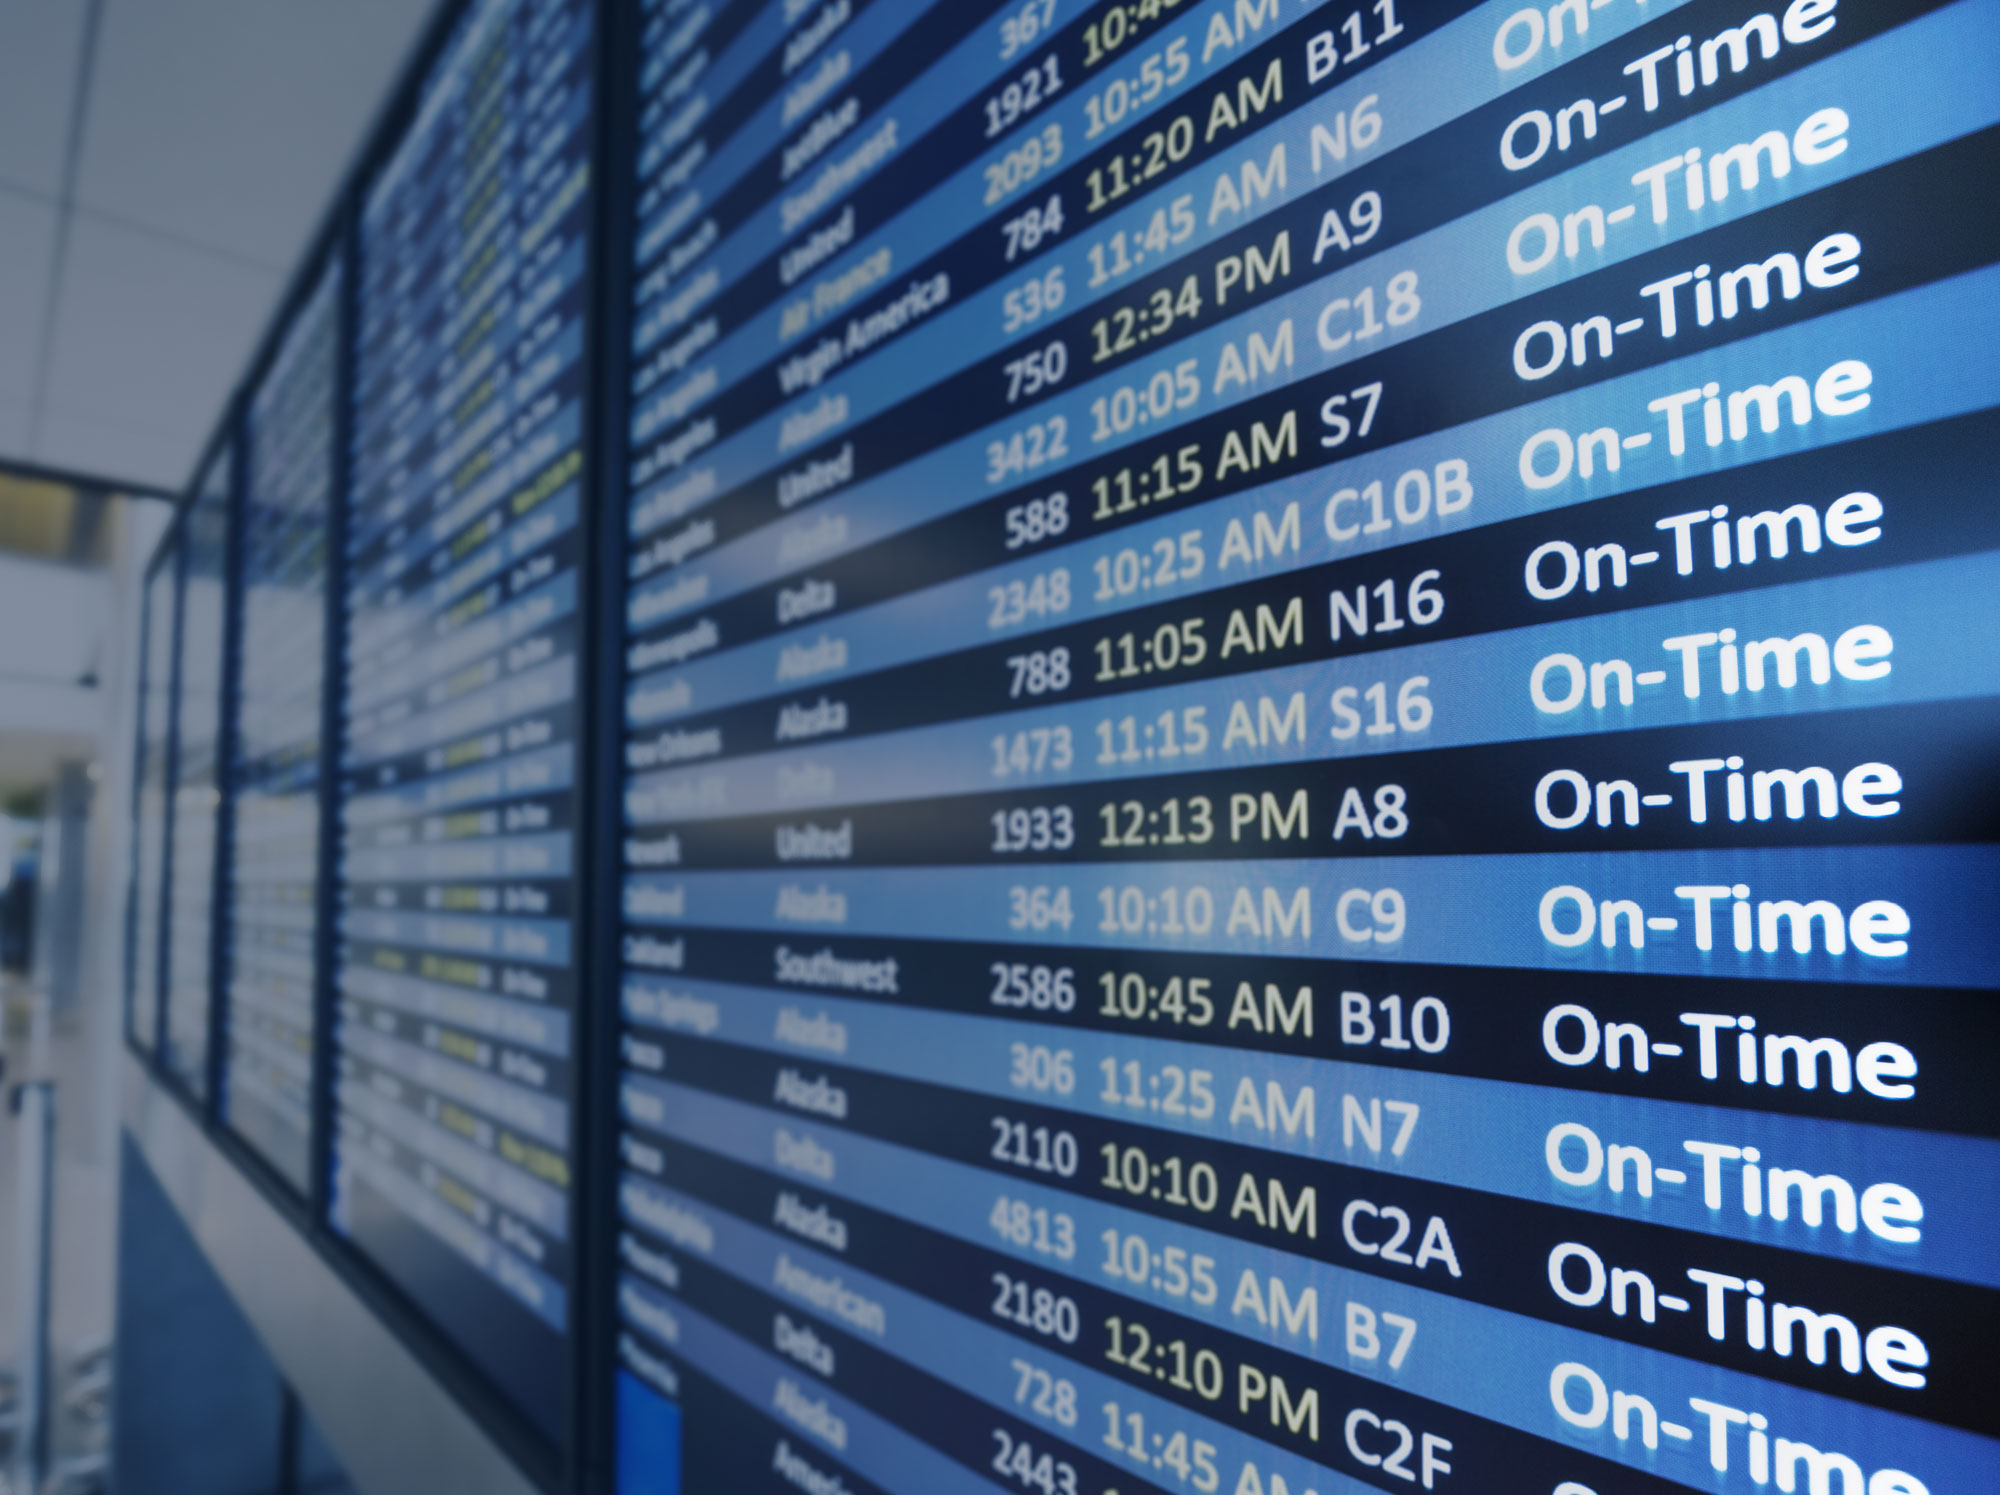 Airline Scheduling & Distribution